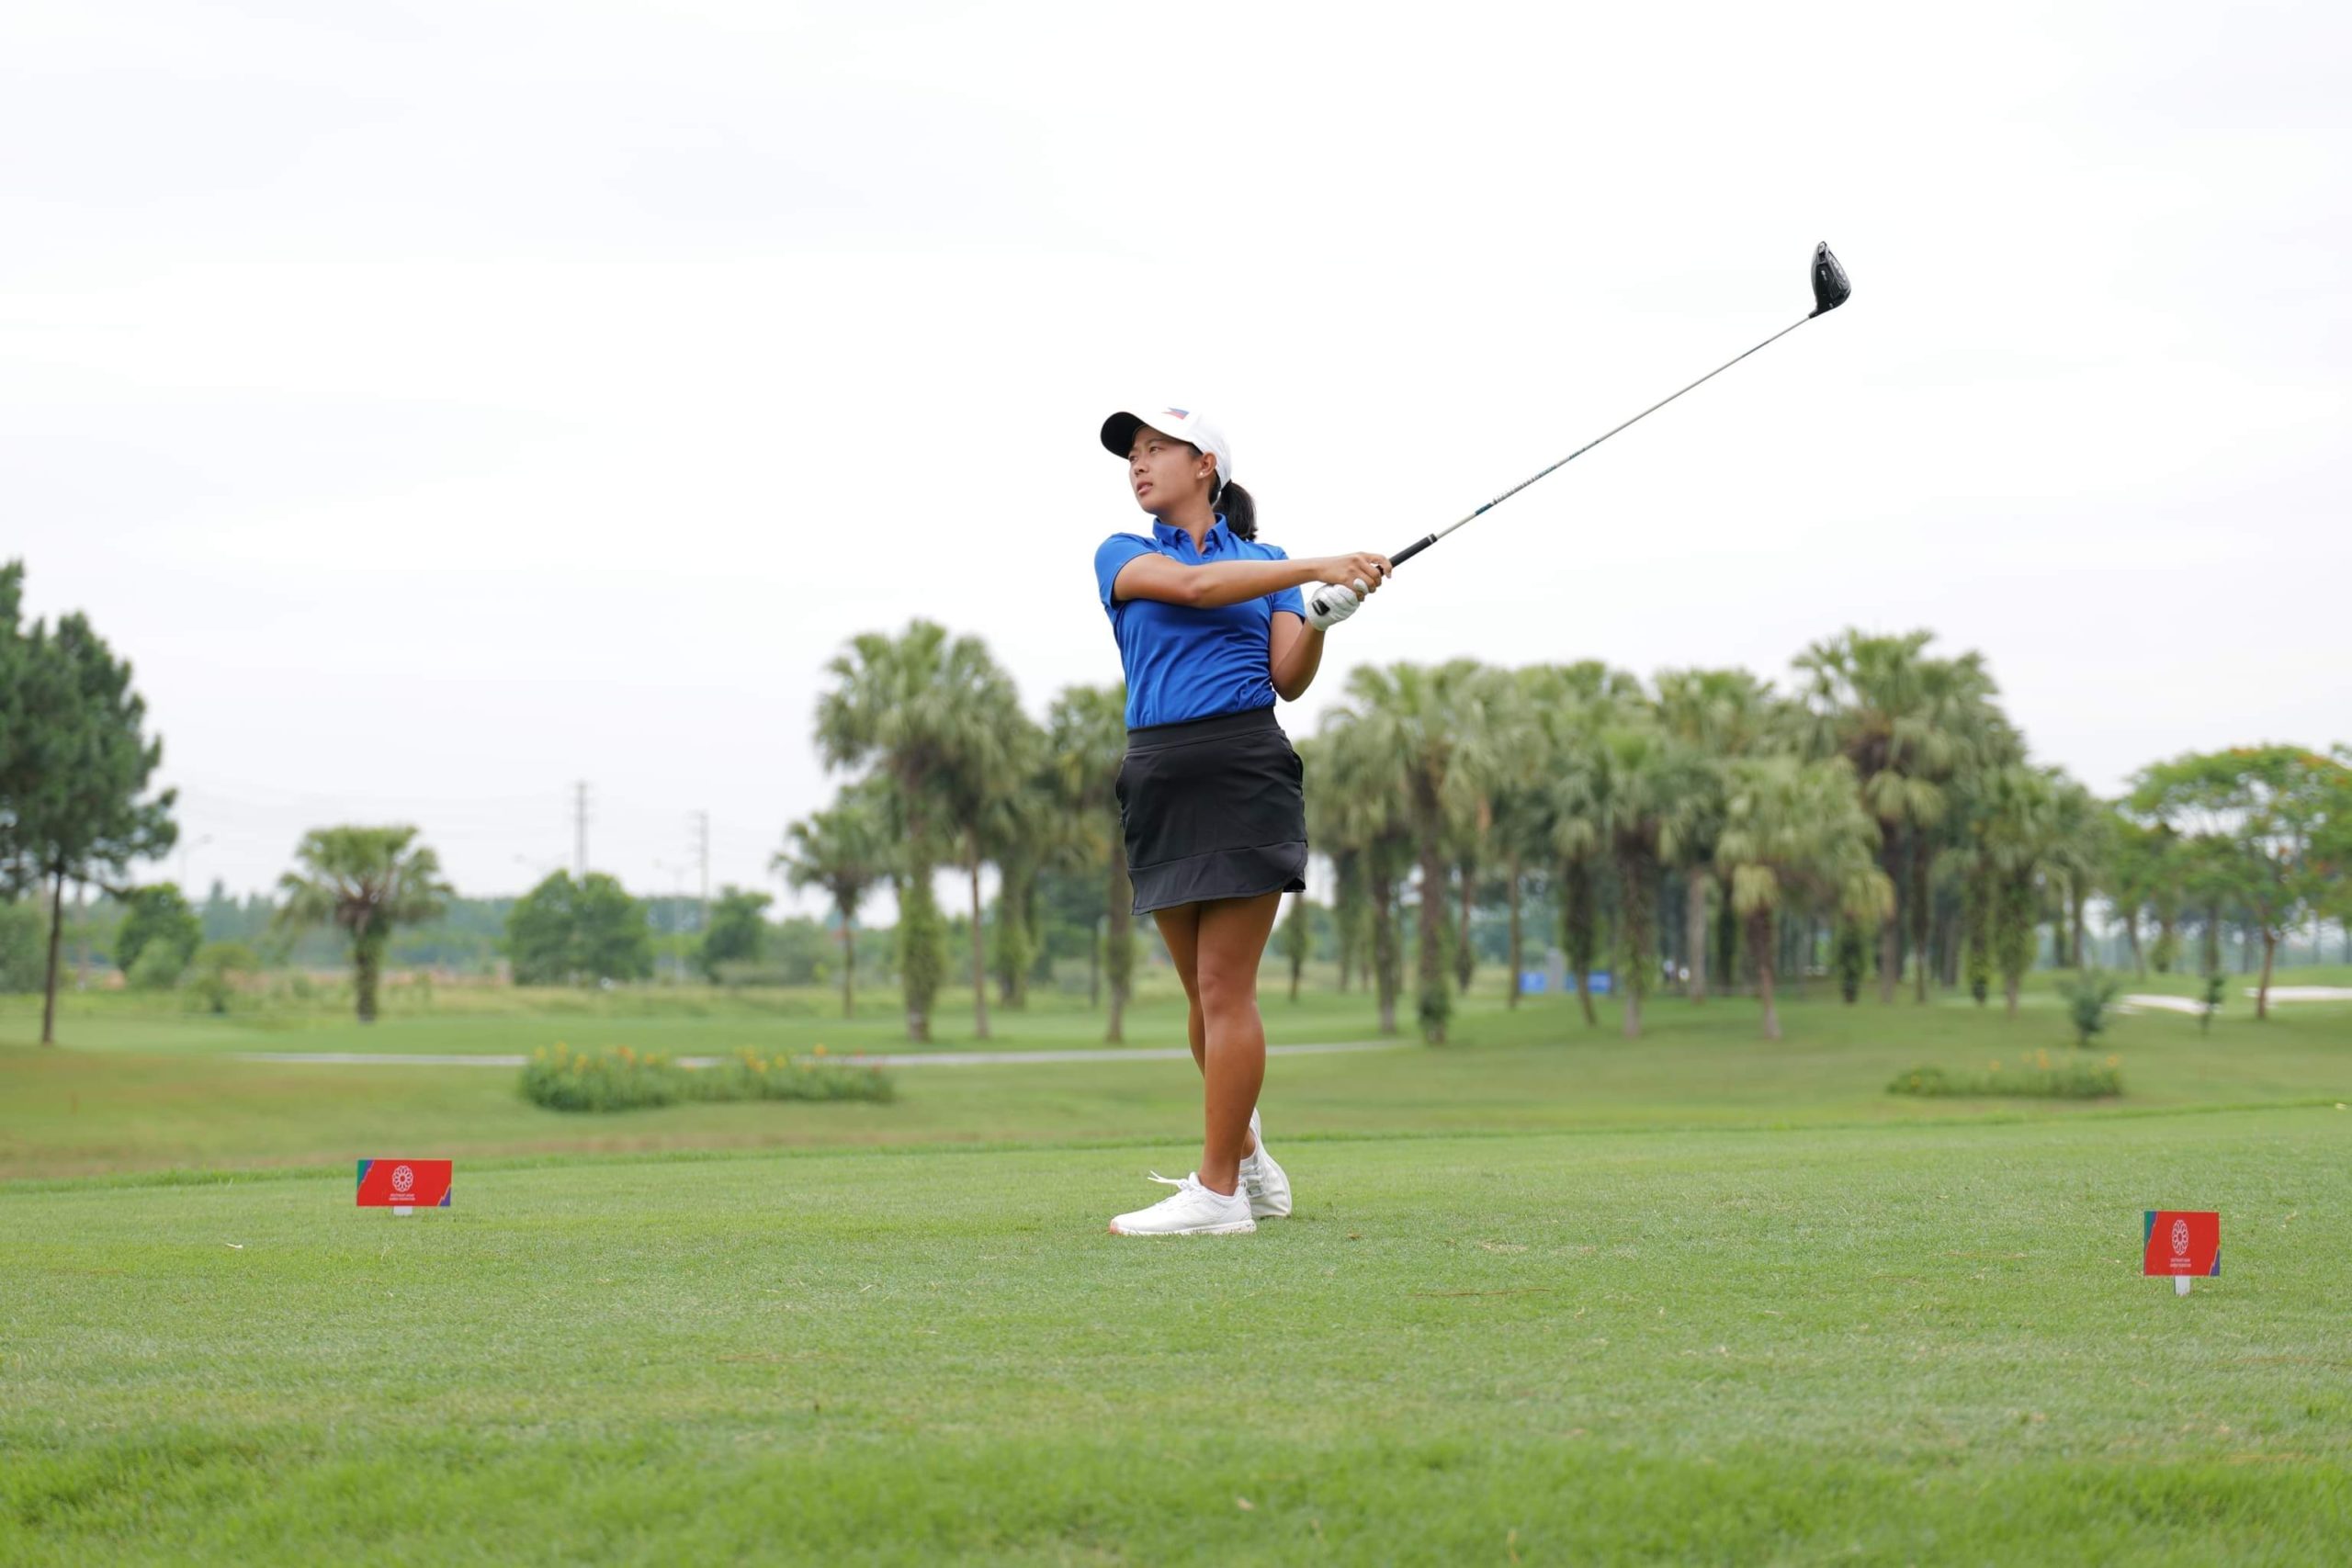 LK Go’s hopes to power the Philippines to a golf gold end with a missed par putt. —JONG ARCANO